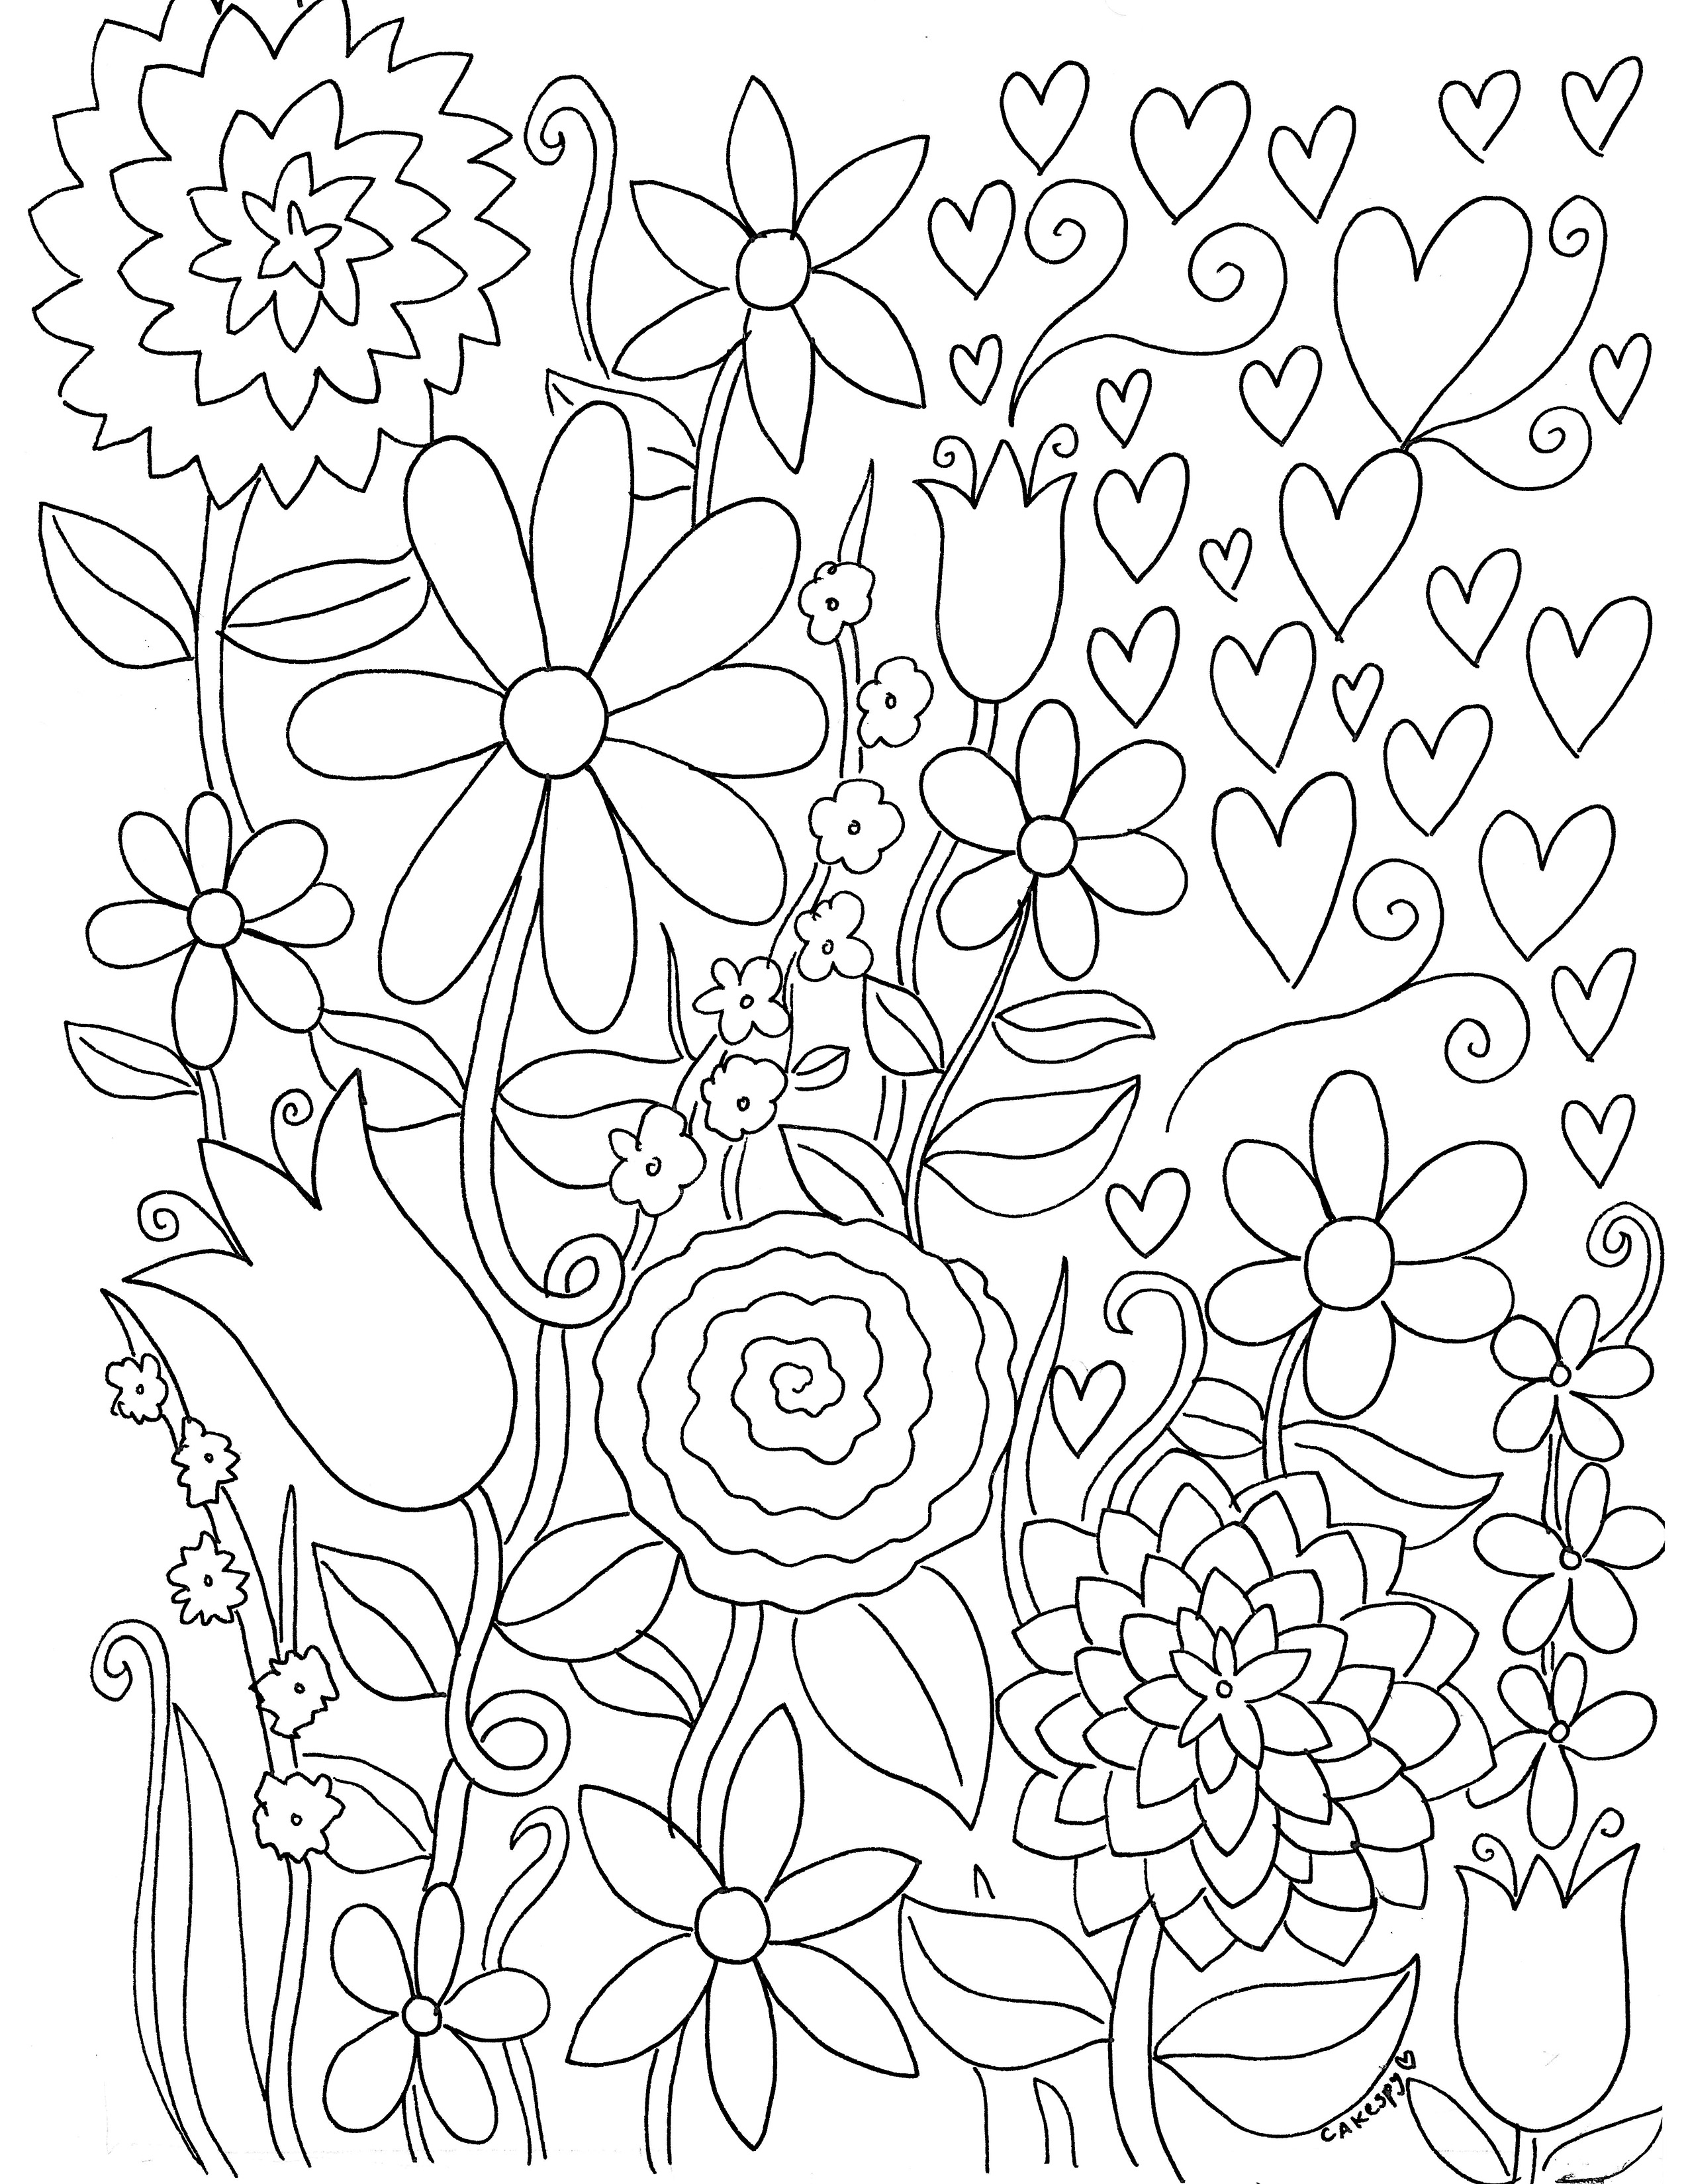 Coloring Book Pages for Adults